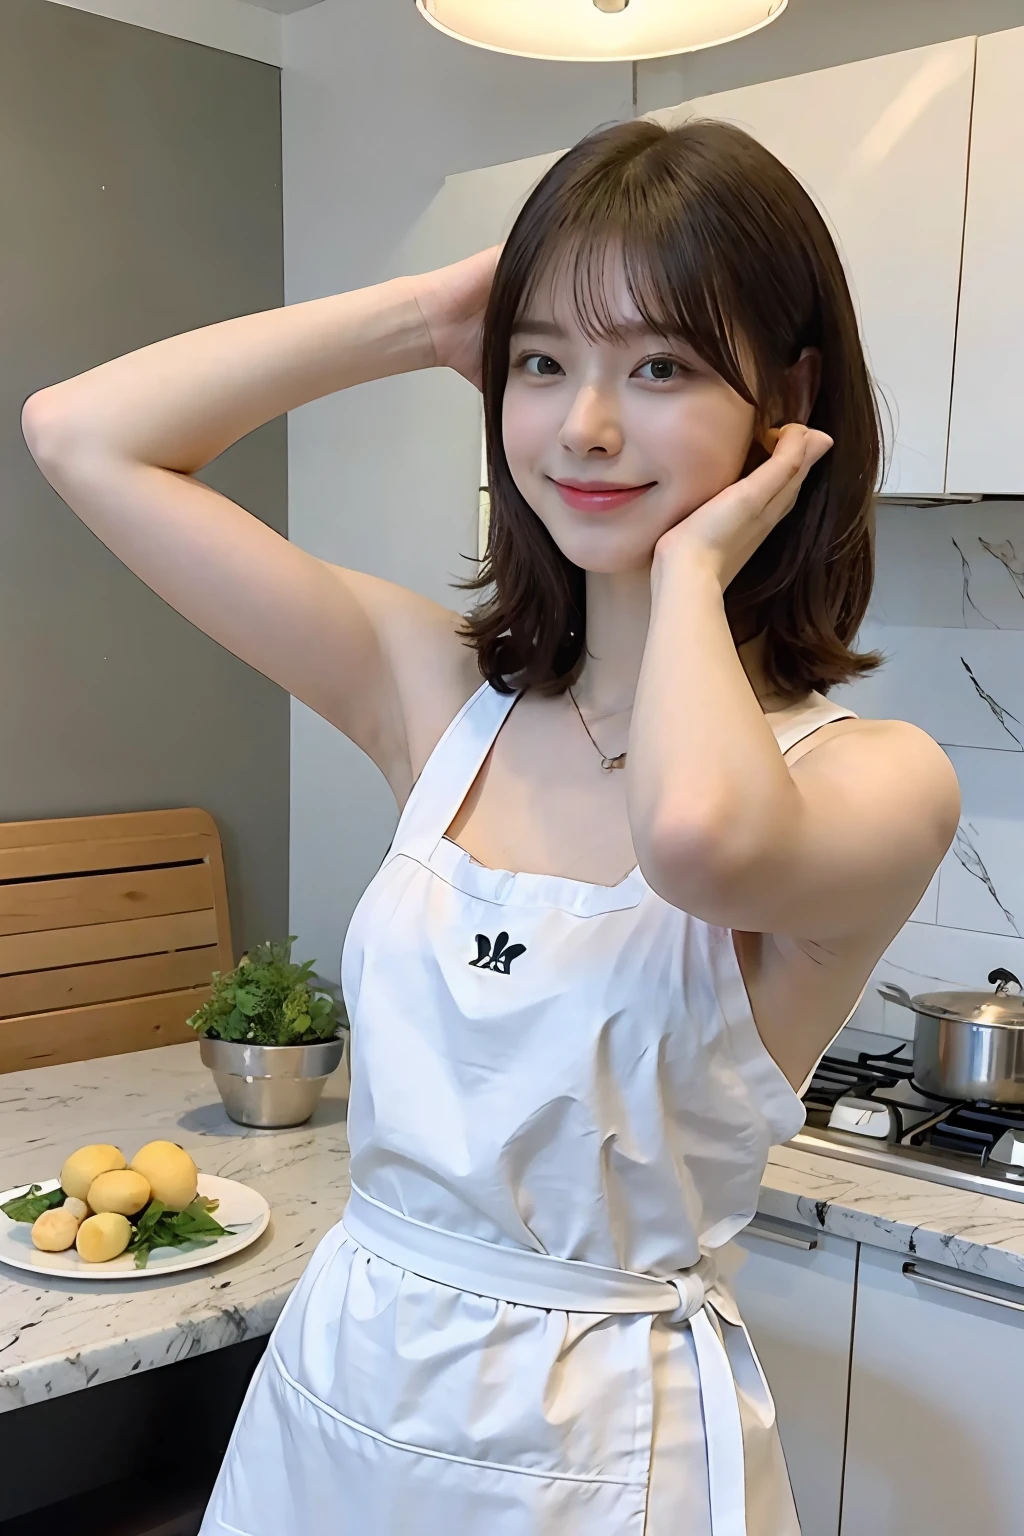 a woman is cooking、(kitchin_apron:1.Wear 3)、Good Hand、4K、hight resolution、​masterpiece、top-quality、cape:1.3、((Hasselblad photo))、Fine skin、sharp focus、(lighting like a movie)、Soft lighting、dynamic ungle、[:(Detailed face:1.2):0.2]、Medium chest、sweats streamed skin:1.2、(((In the kitchen))) A smile　Beautiful profile　Colossal tits　Beautiful body　Tying hair　Wide background々and a luxurious living room　Luxurious and luxurious living　Luxurious living room　Beautiful living room　Beautiful living room　A smile　an orange　lemons　A smile　Laughing　banana in　pineapple　Luxurious room　beautiful  lighting　Beautiful lighting　Very large room　very high image quality　very high res　8k Photos　Viewer's Perspective　Very gorgeous kitchen　Luxury Kitchen　white tank tops　White apron　Millionaire Kitchen　Fine kitchen